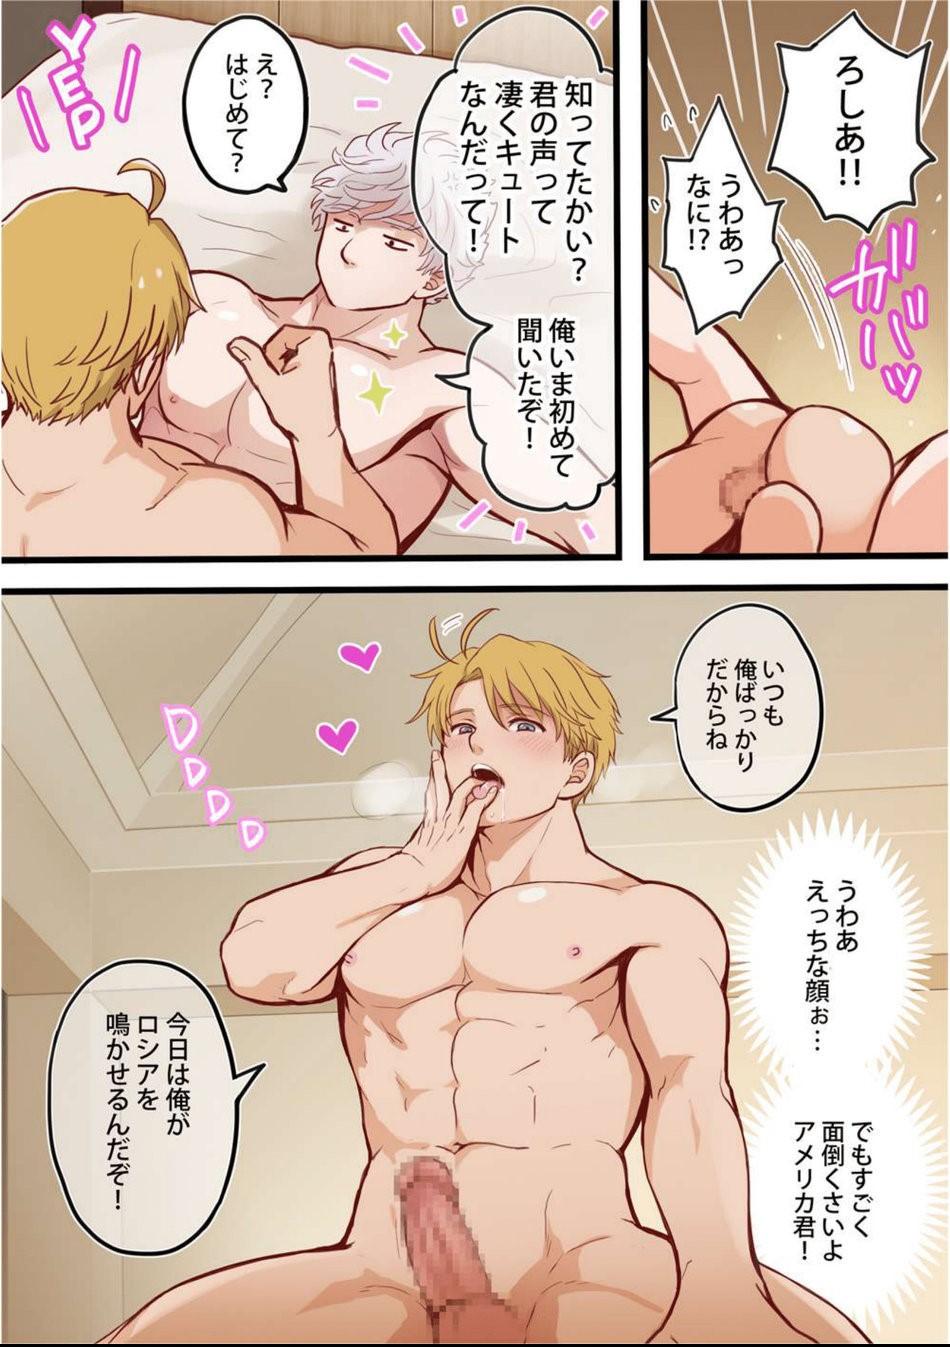 Scene Which one is better – Hetalia dj - Axis powers hetalia Pussy Licking - Page 9